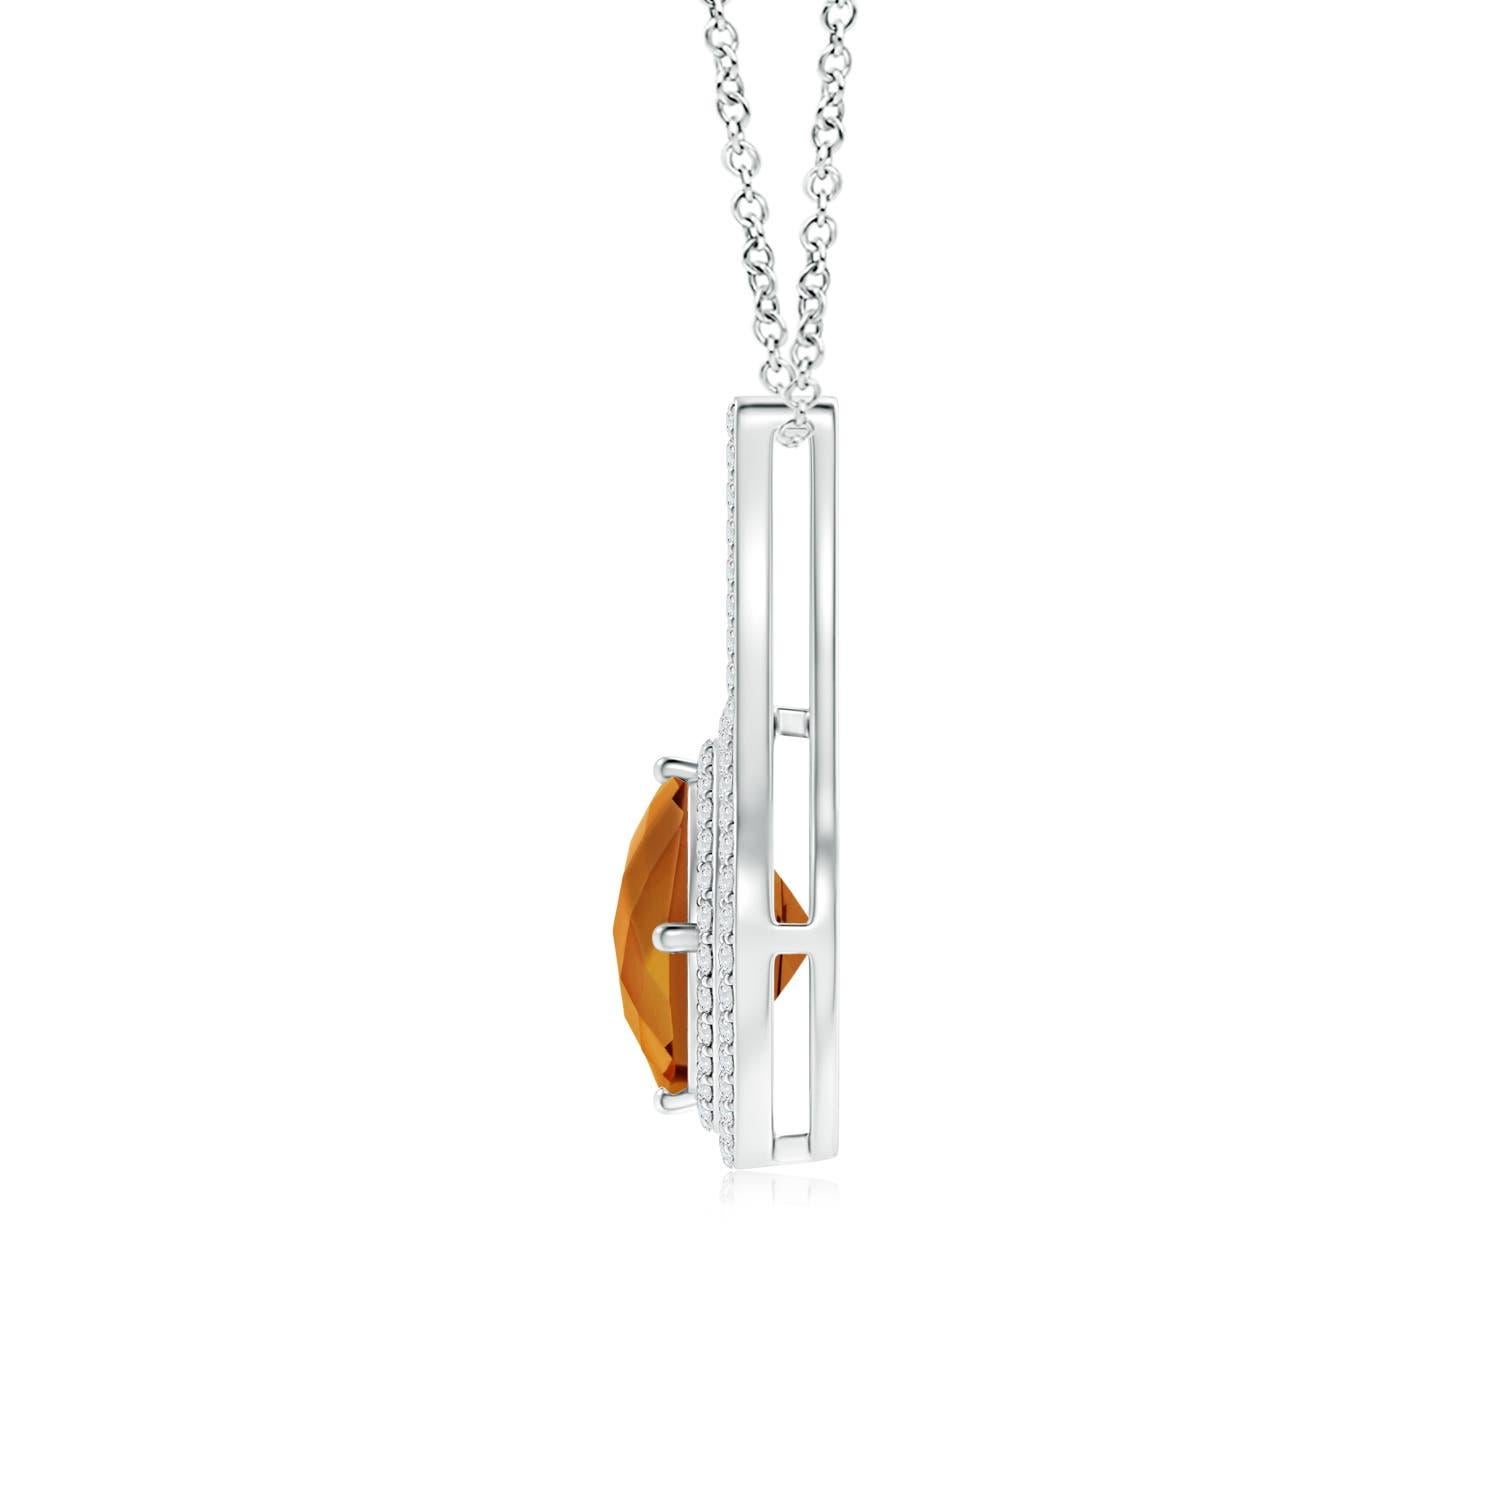 This splendid 14k white gold pendant is designed with a dazzling inverted V-bale. It features a stunning GIA certified cushion yellowish orange zircon that is prong-set sideways and illuminated by a double halo of shimmering diamonds.
